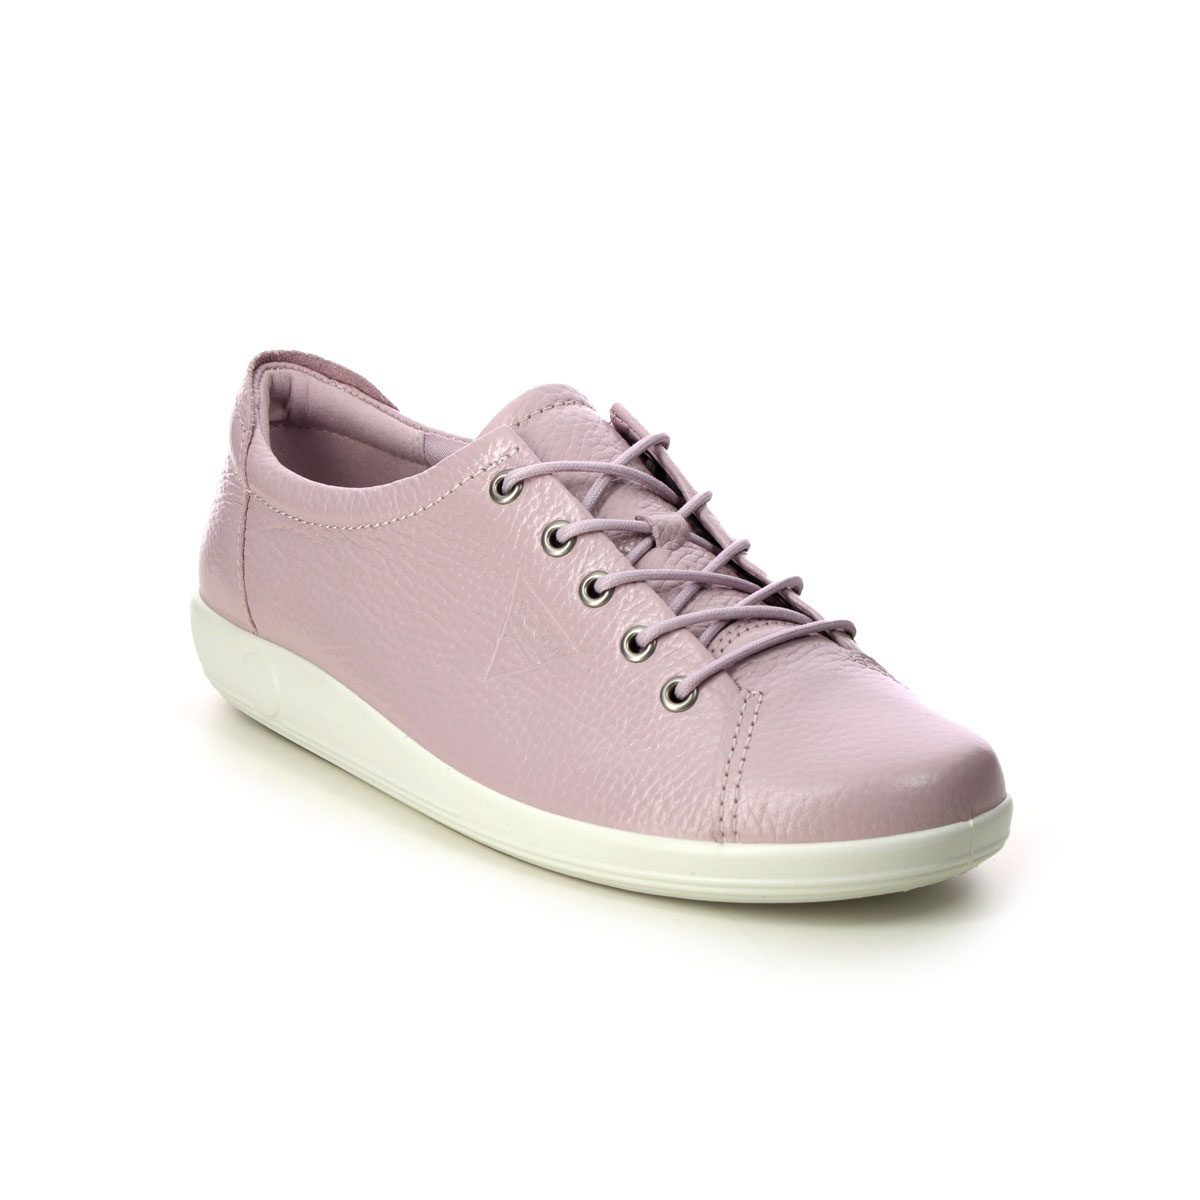 ECCO Soft 2.0 Violet Womens lacing shoes 206503-01405 in a Plain Leather in Size 42